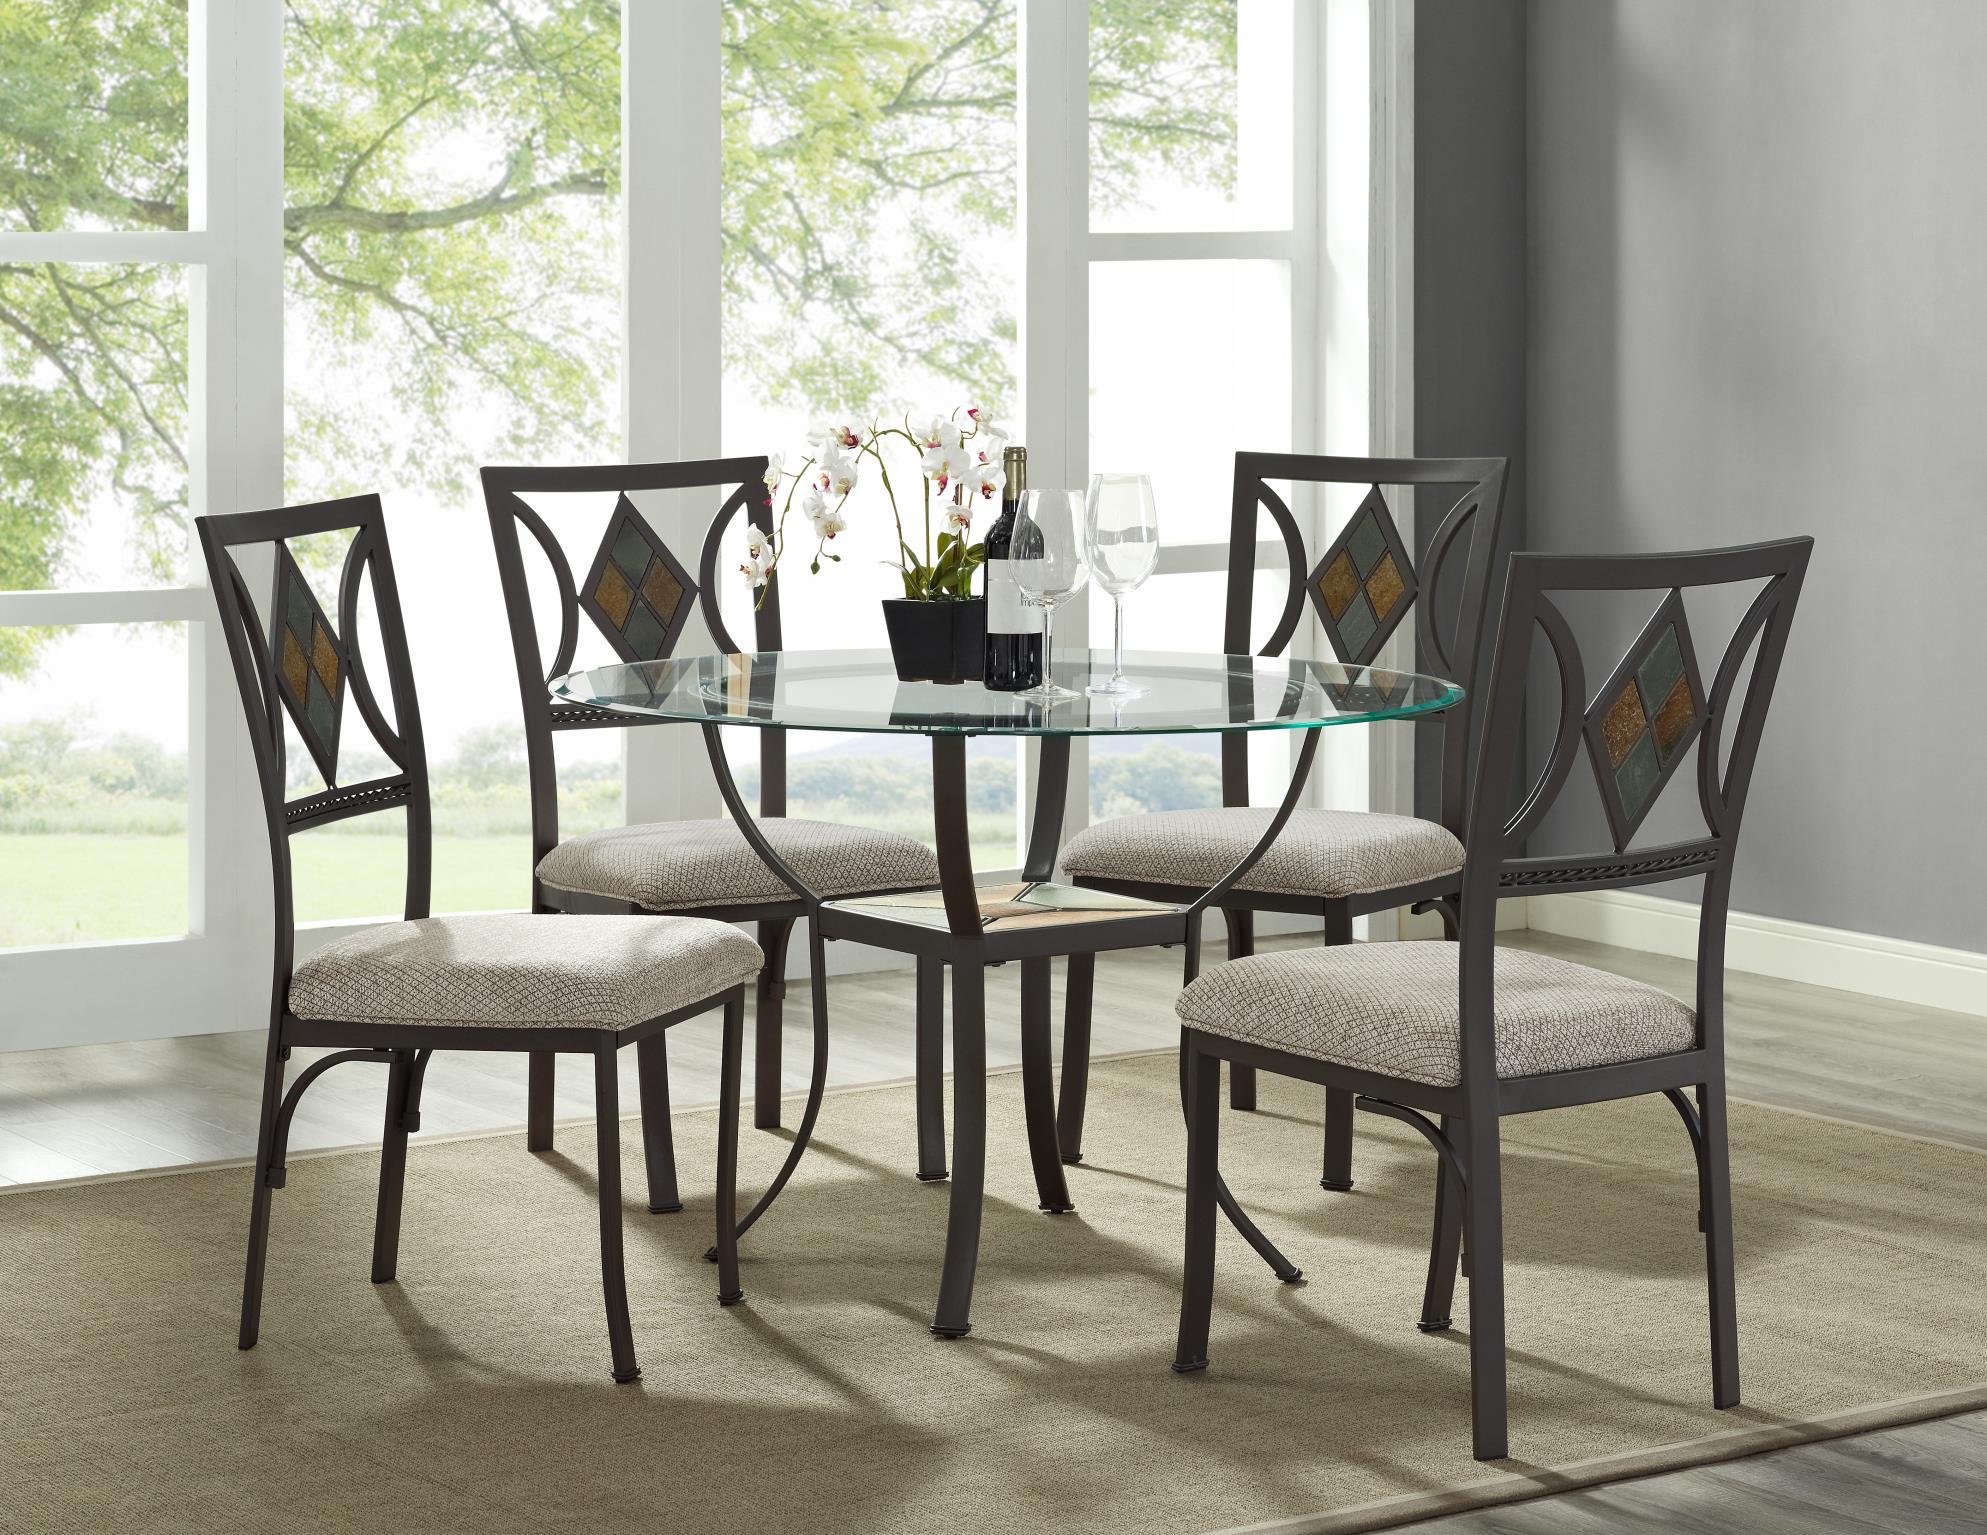 Contemporary, Casual Dining Room Set Diamond 4624-5pcs in Brown, Black Fabric